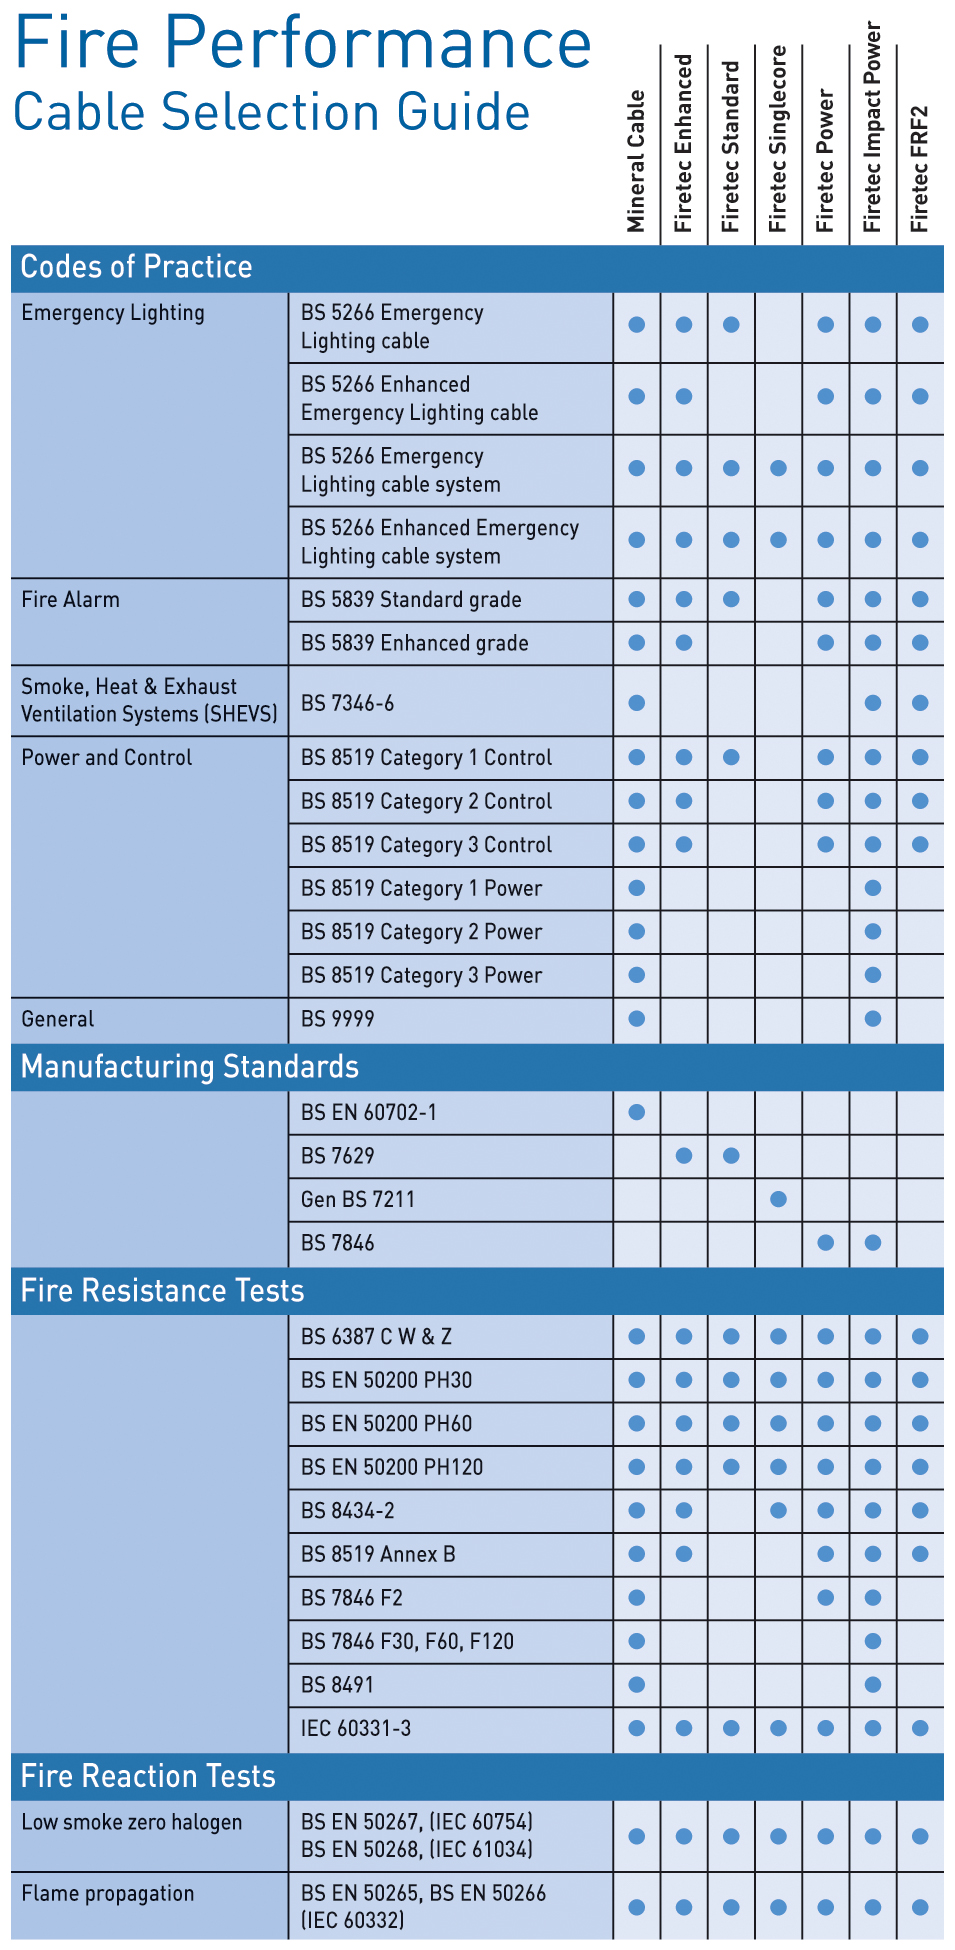 AEI Cables' Fire Performance Cable Selection Guide helps specifiers choose the right cable for the right application